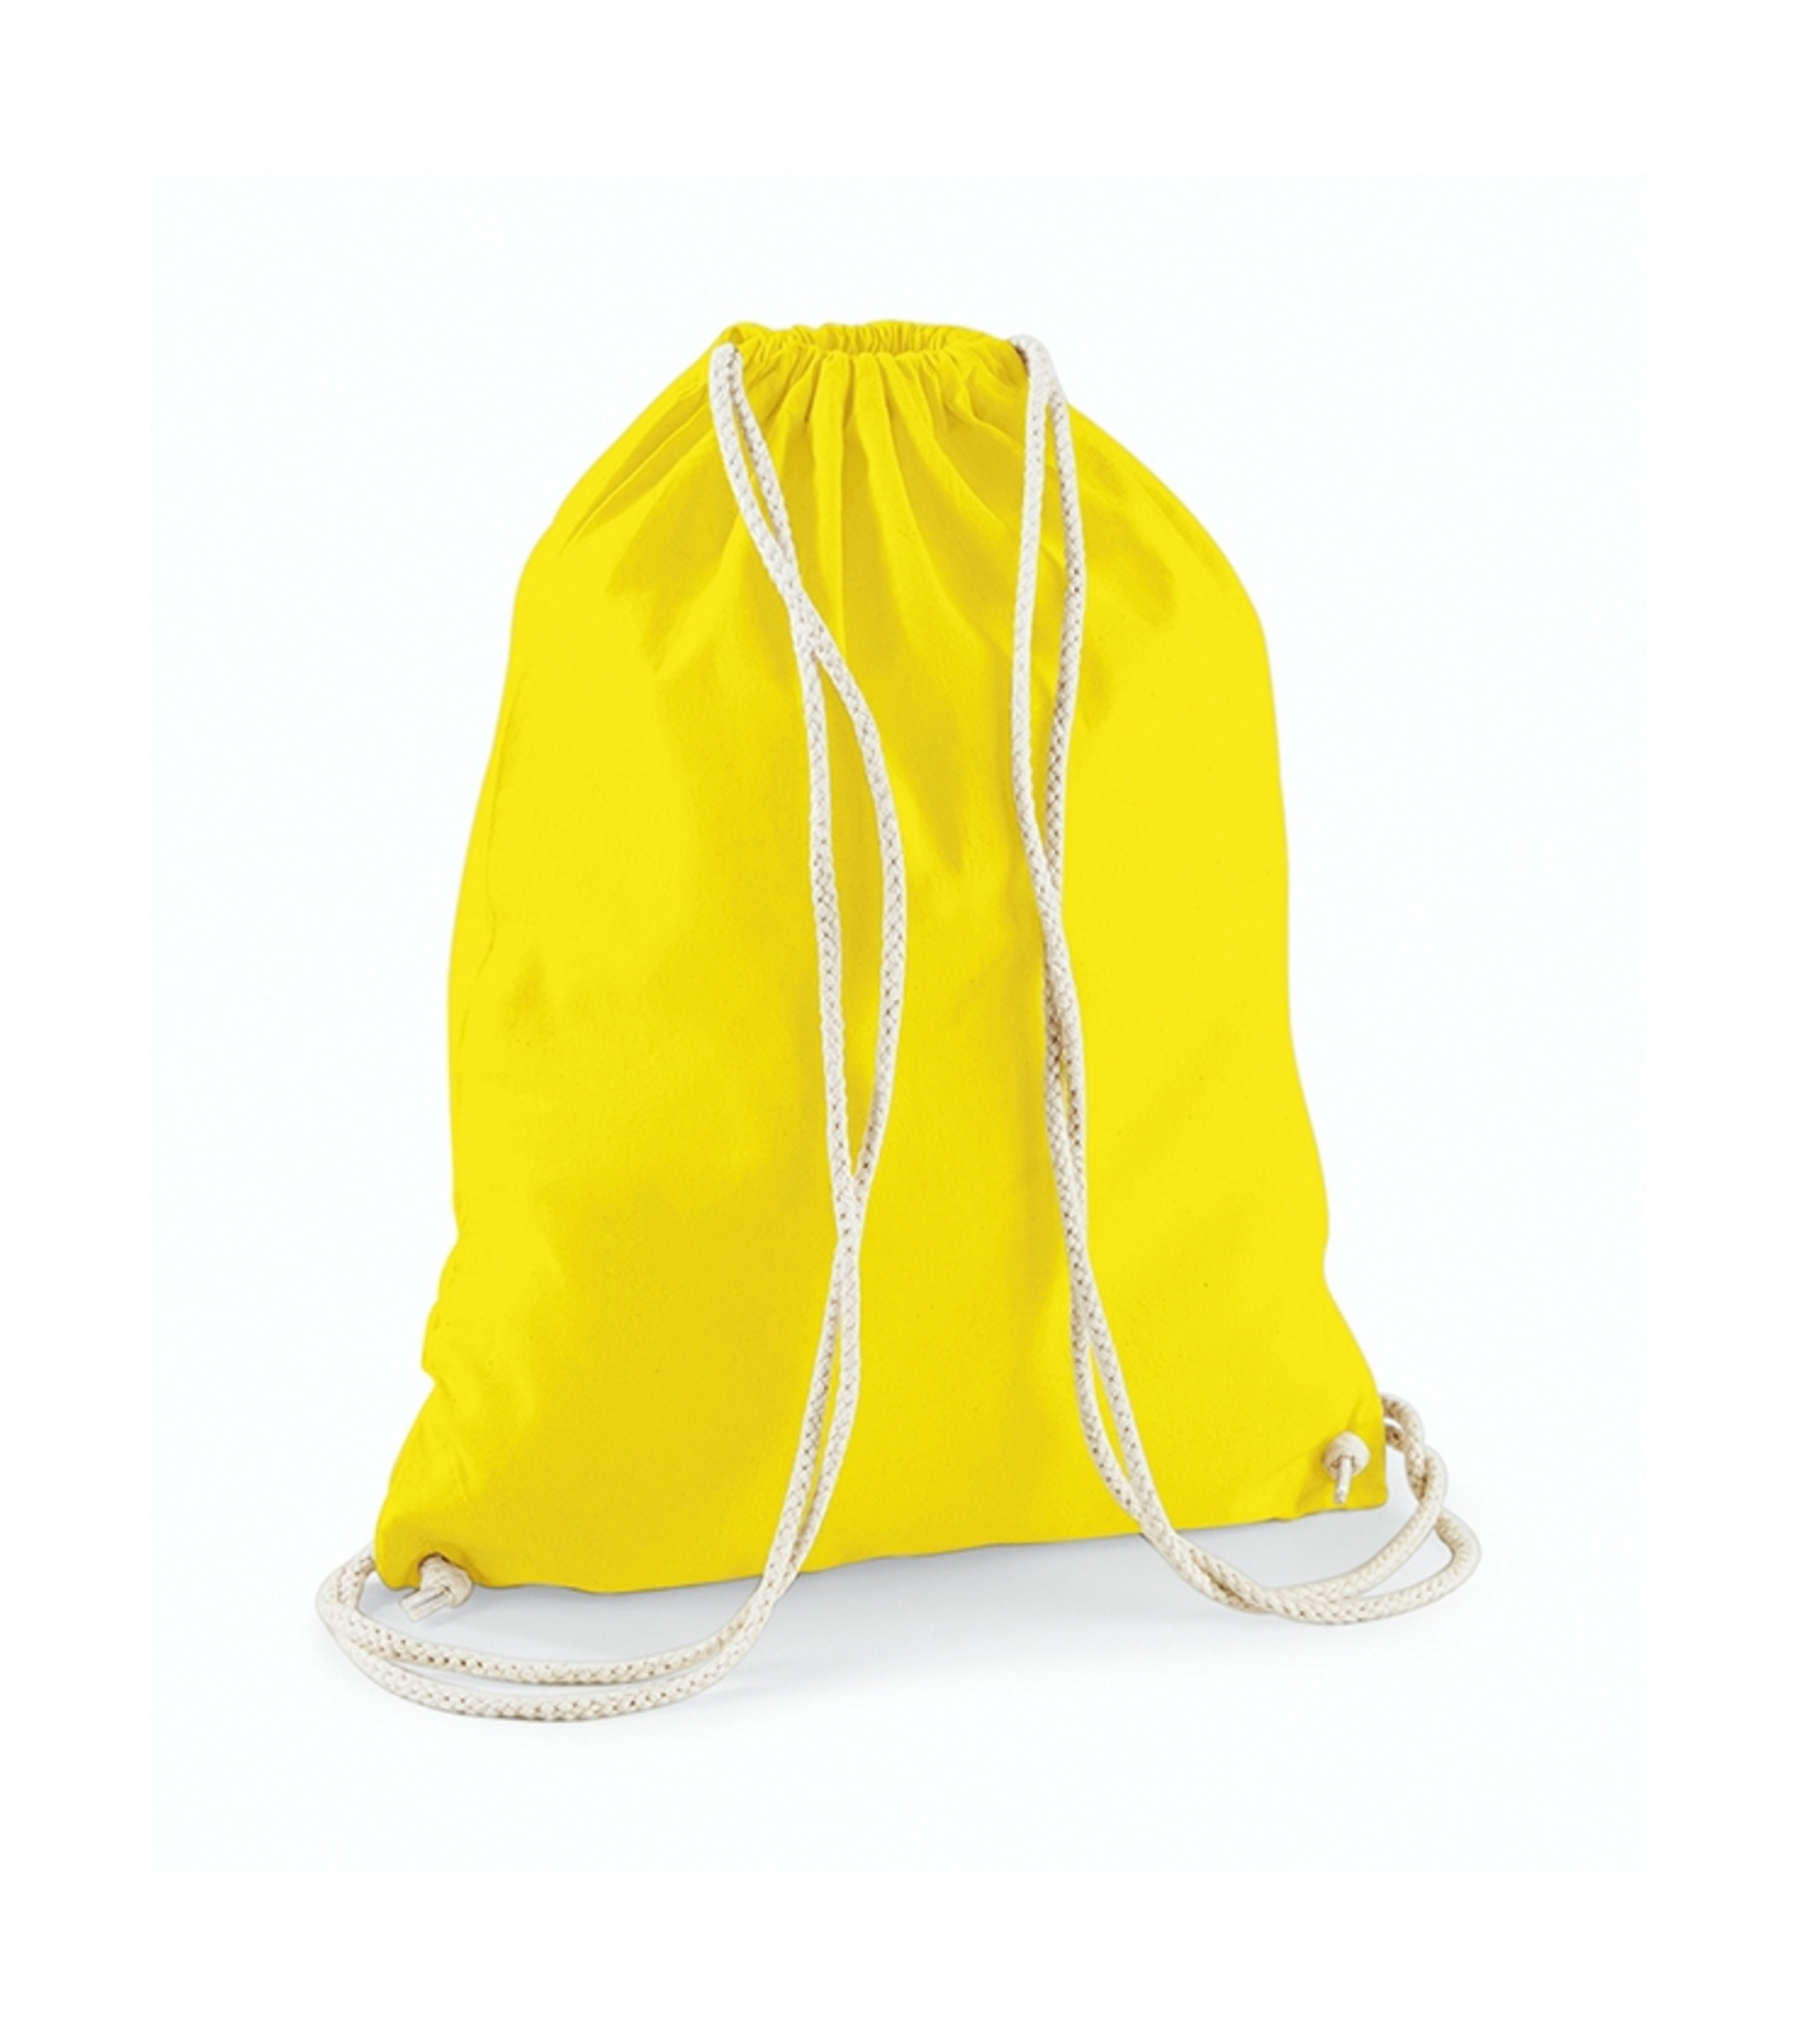 Westford Mill Cotton Gymsack - Yellow - One Size